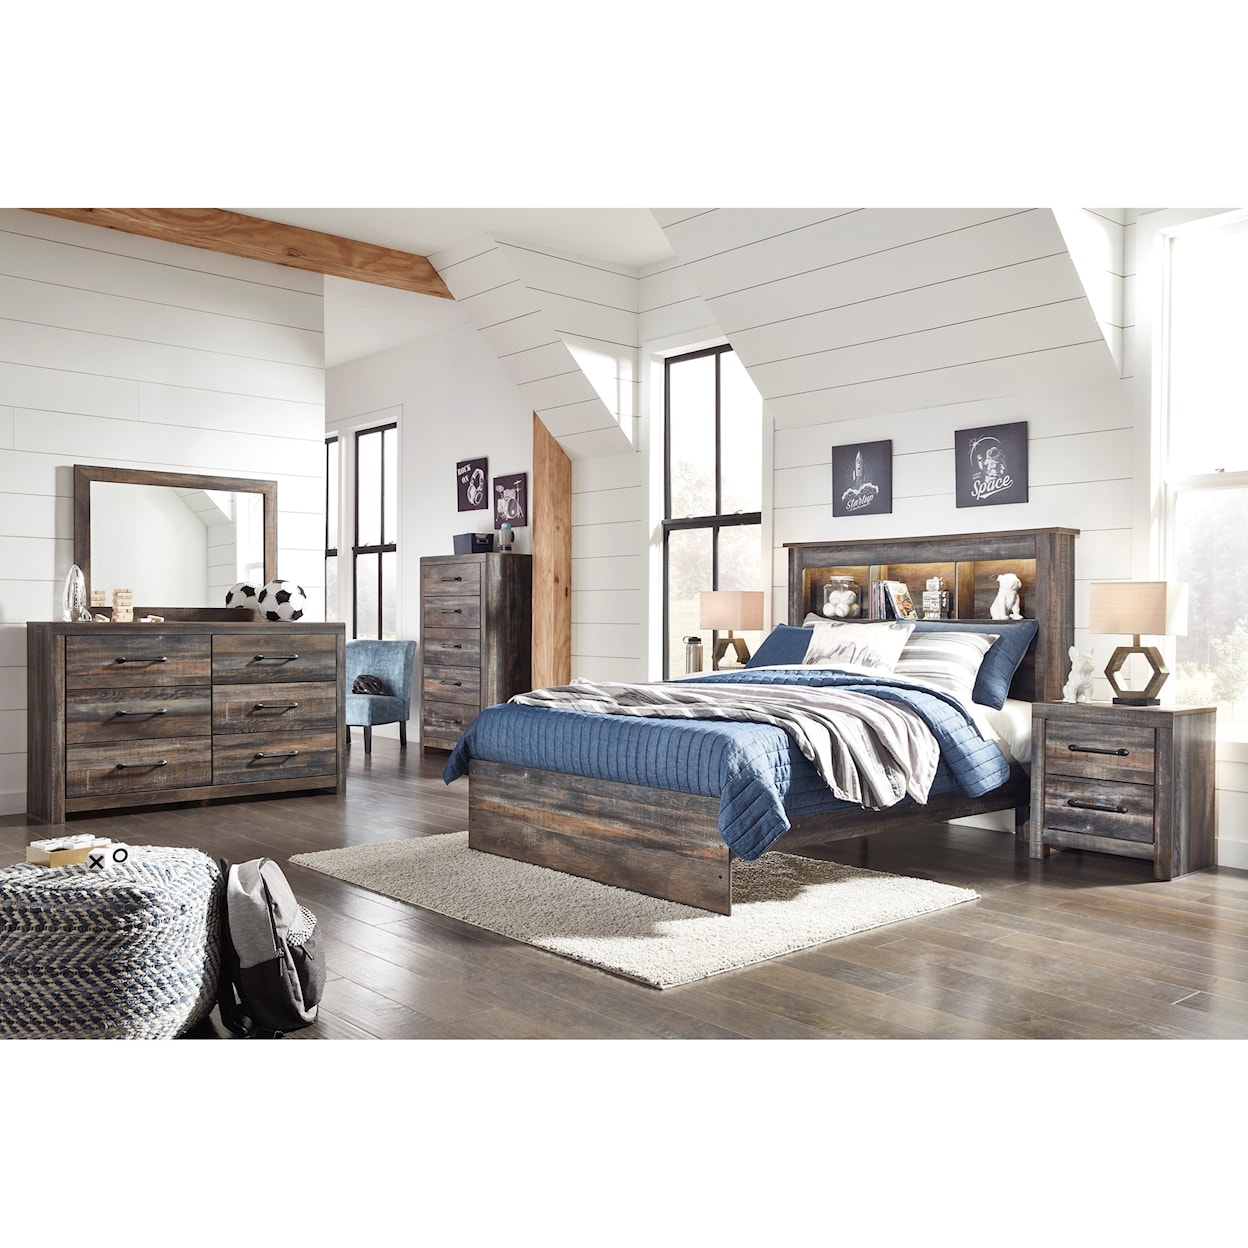 Signature Design by Ashley Baleigh Queen Bedroom Group